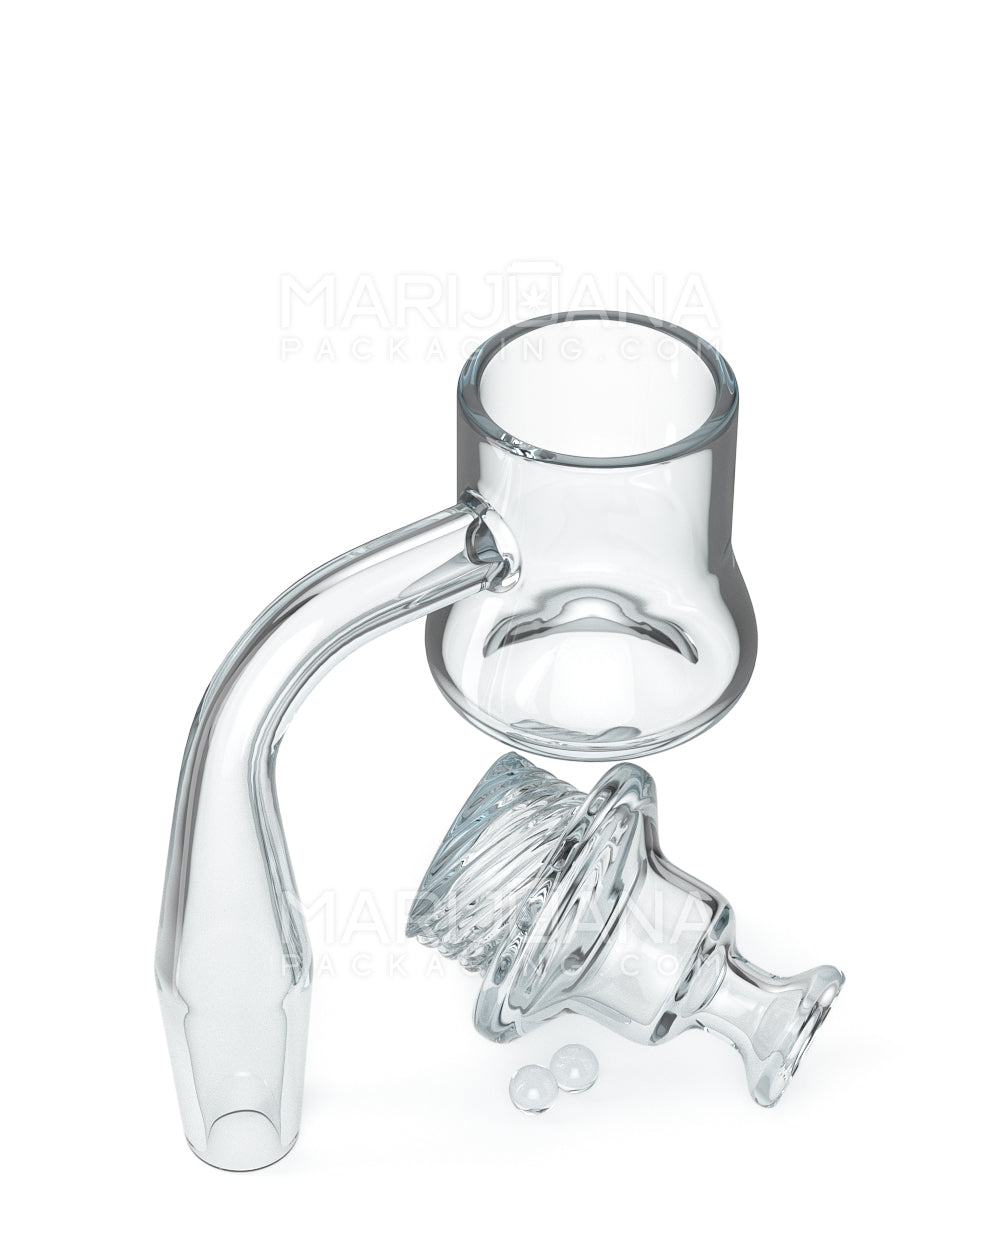 Thick 4mm Quartz Banger Kit w/ Bell Spinner Carb Cap & 2 Pearls | 14mm - 90 Degree - Male - 4